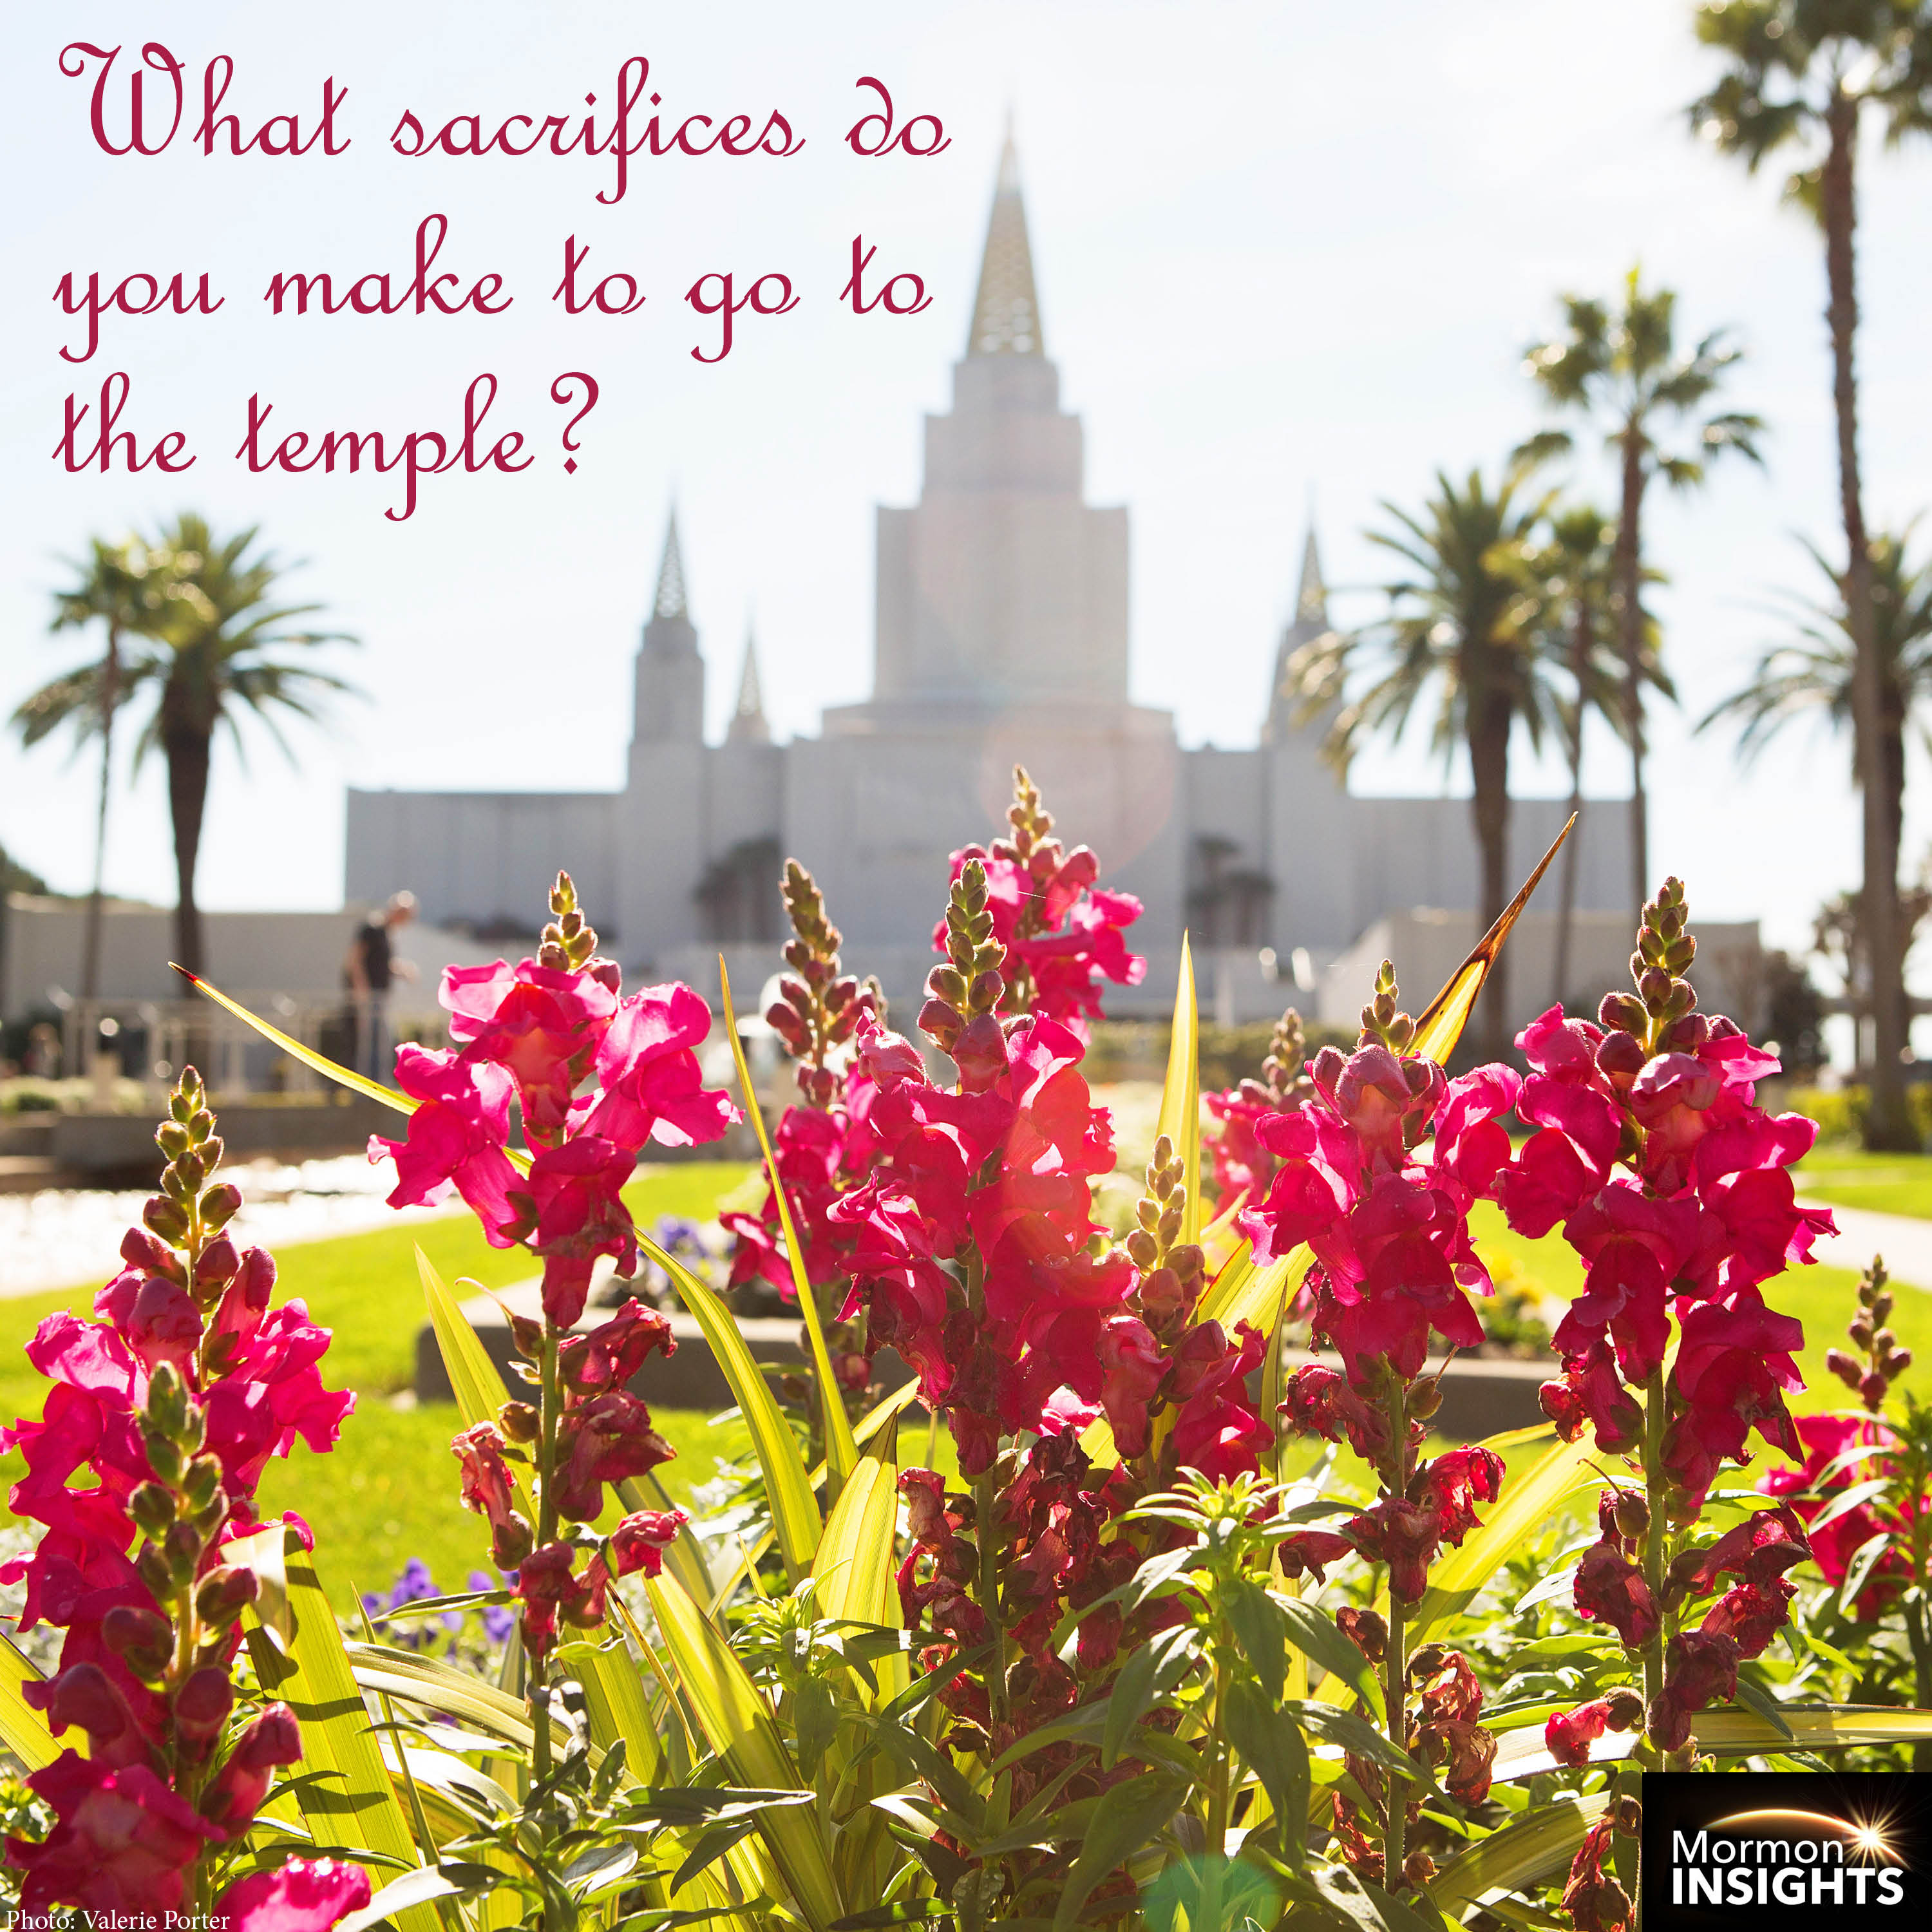 "What sacrifices do you make to go to the temple?" flowers with LDS temple in the background.